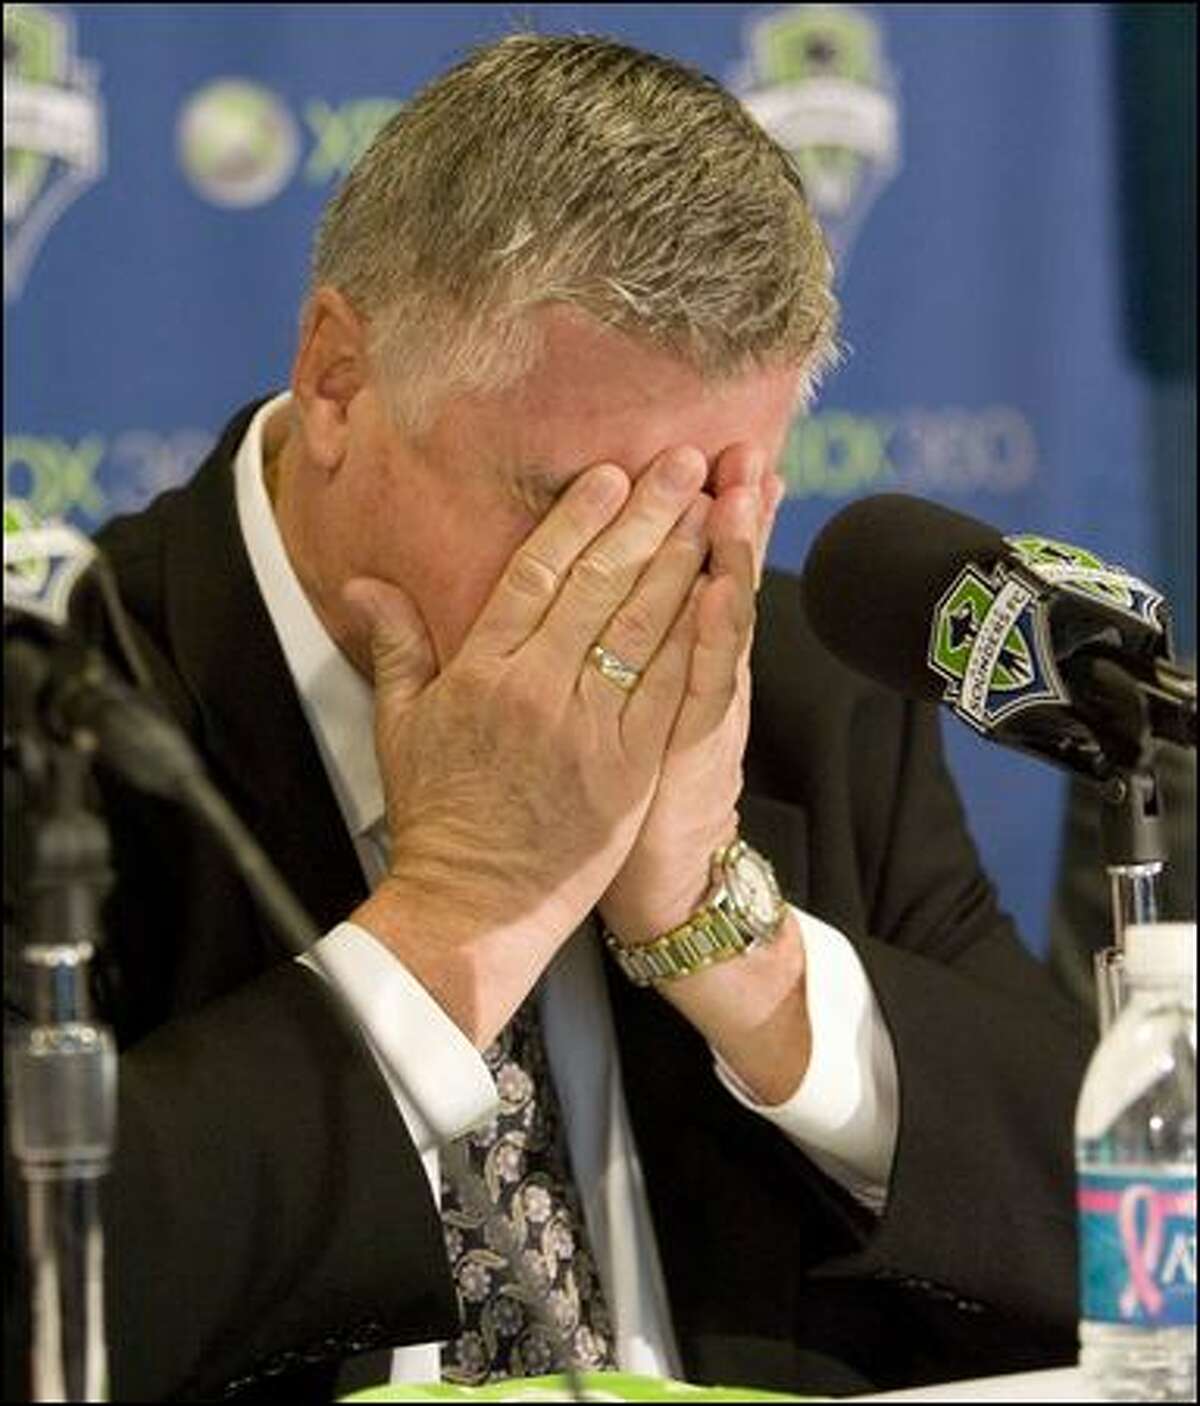 At Tuesday's press presentation, an emotional Sigi Schmid buries his face in his hands while talking about being the Sounders FC's first head coach and managing the team in the same city where his brother Roland lives with his family.